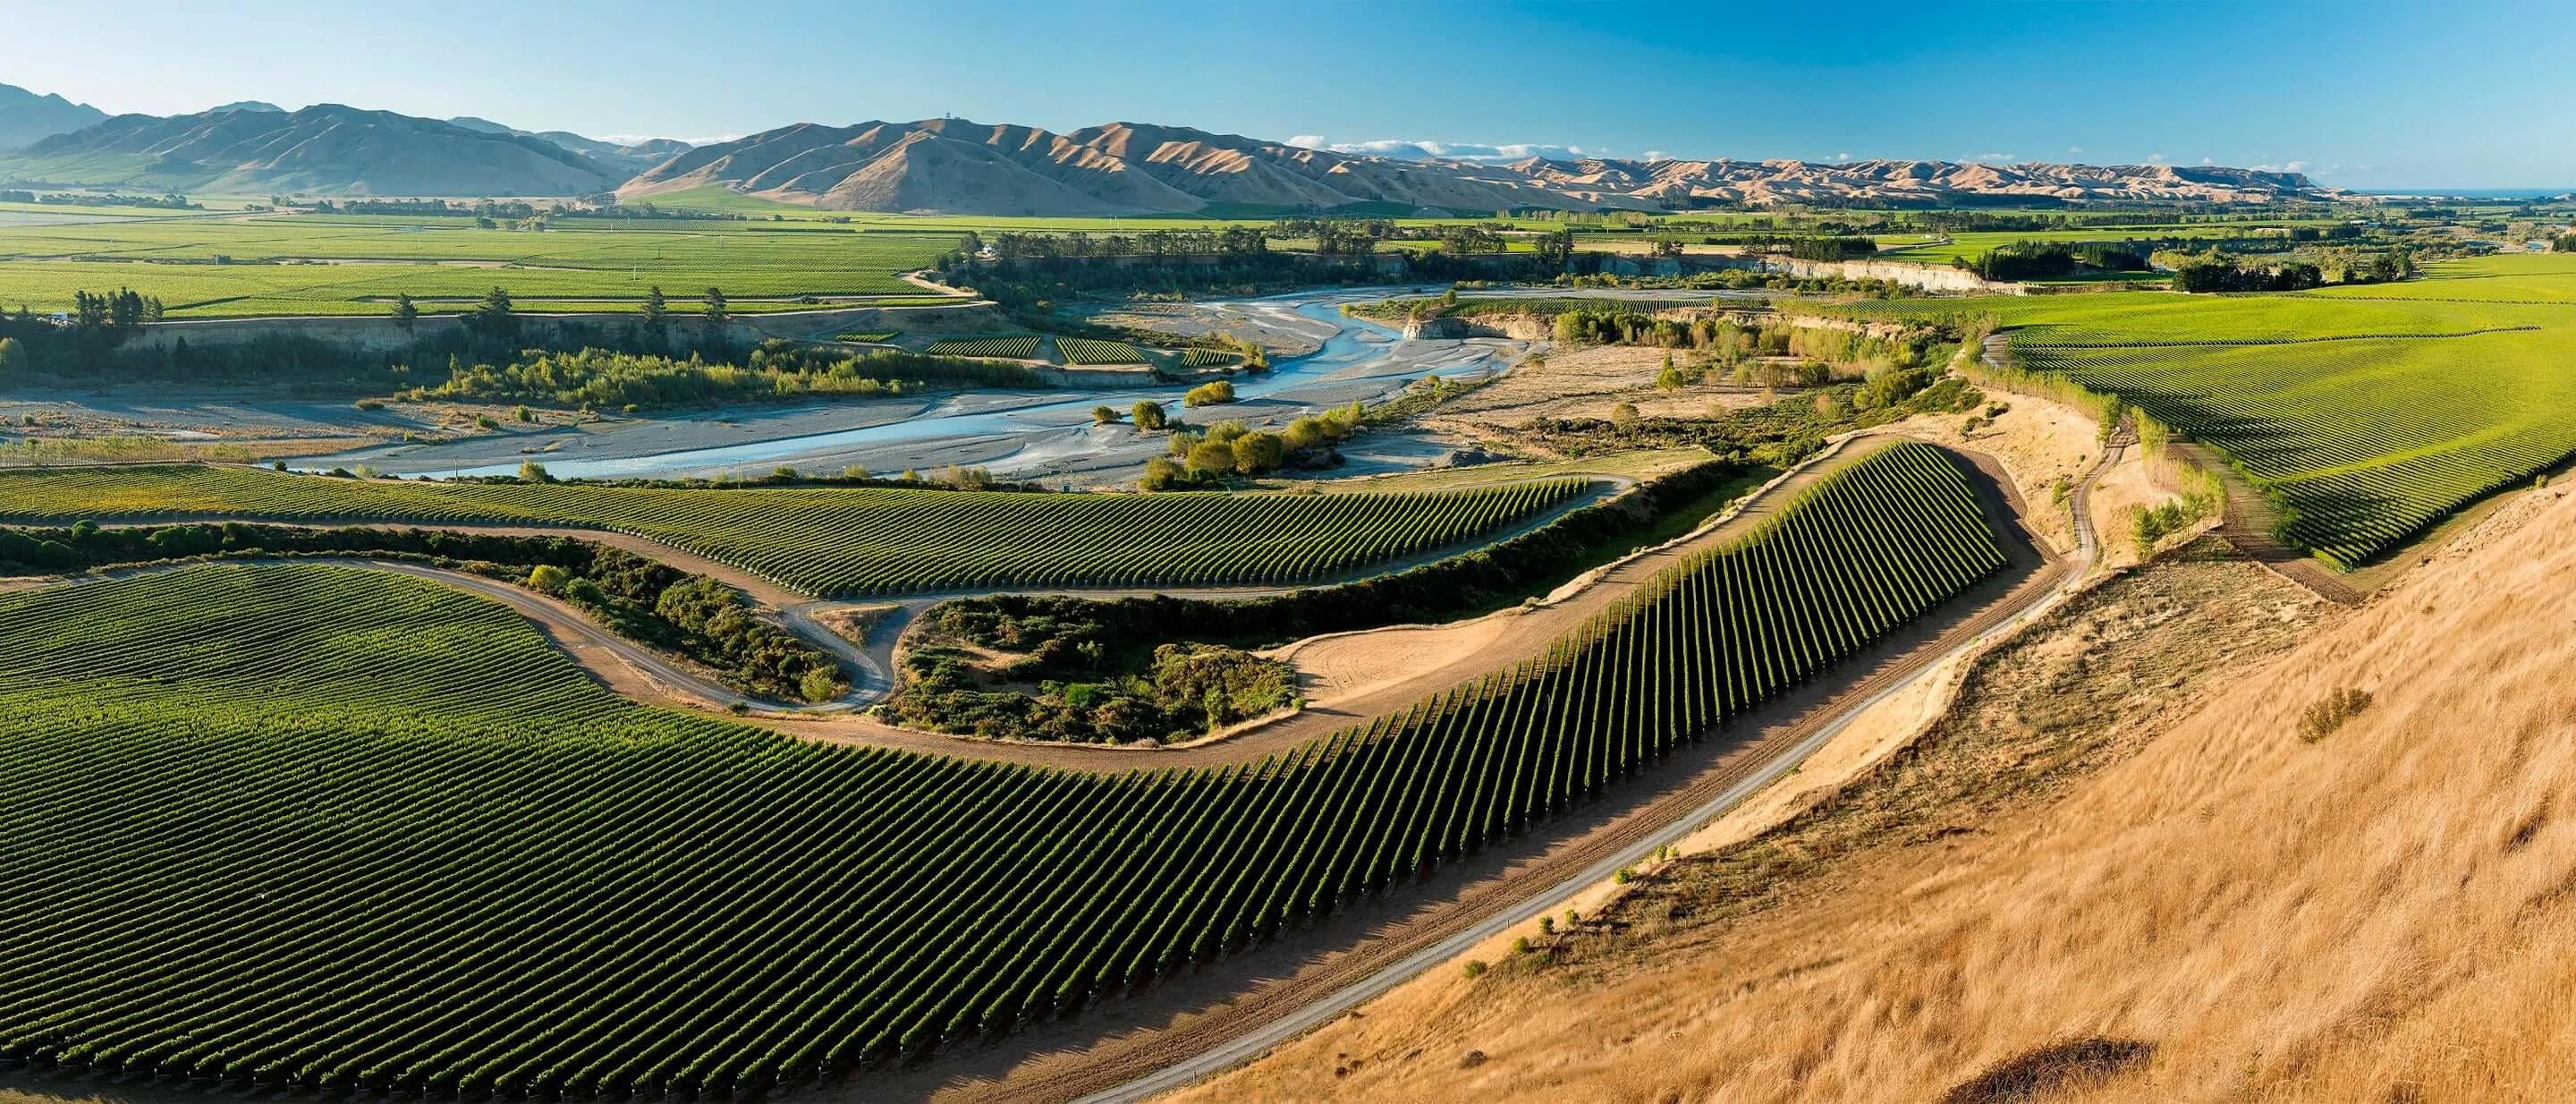 Awatere River and Triplebank vineyard in New Zealand.